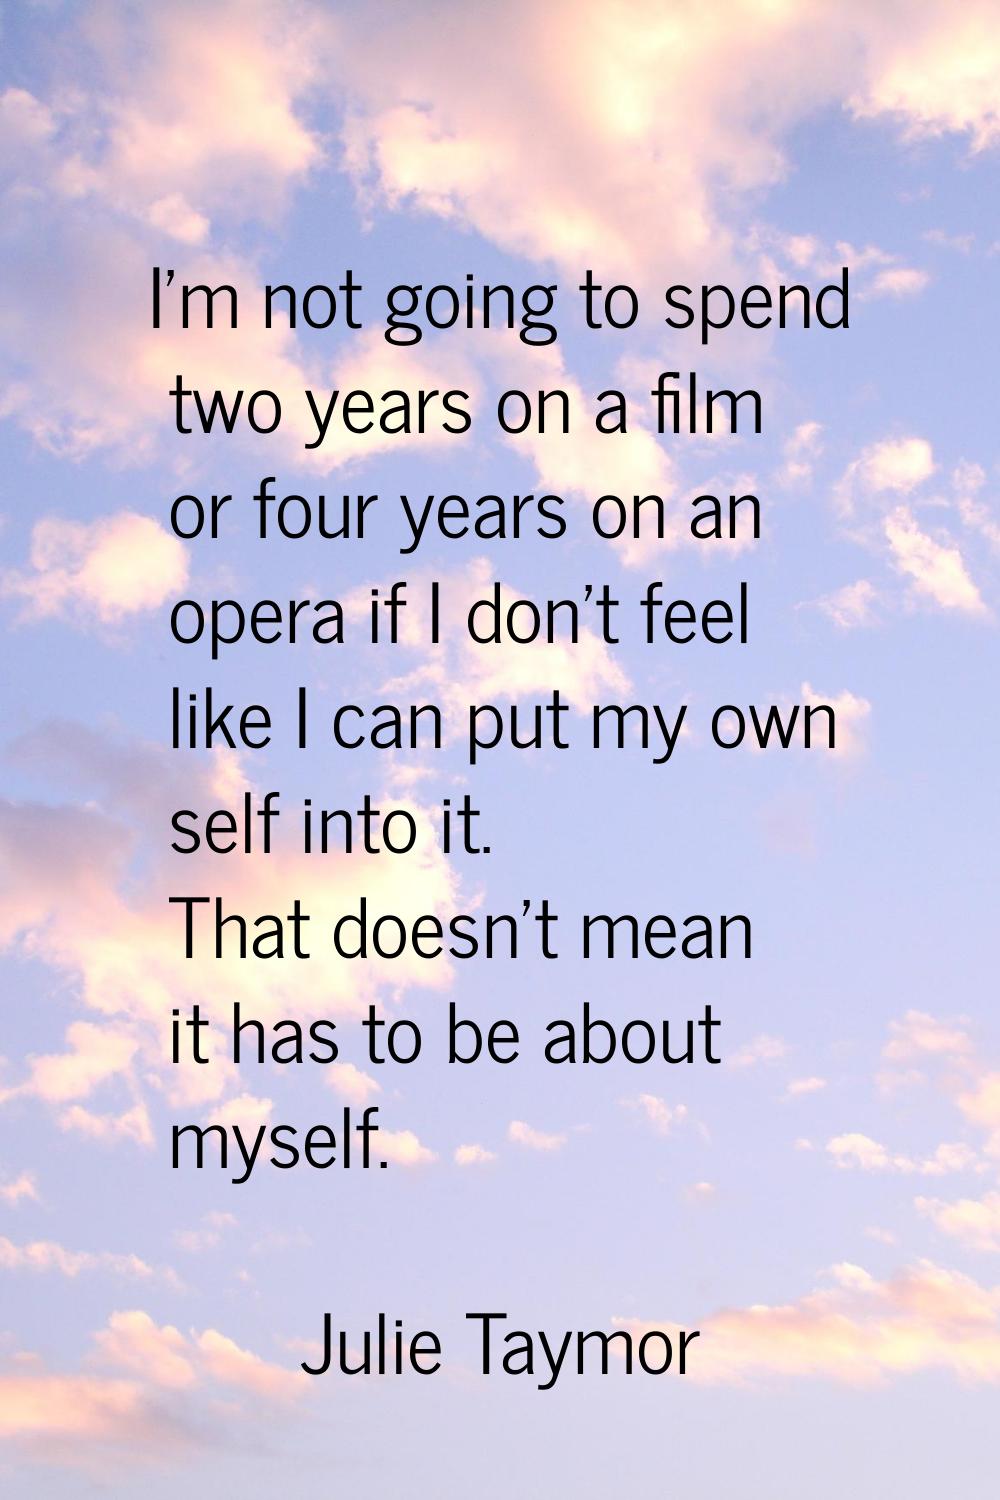 I'm not going to spend two years on a film or four years on an opera if I don't feel like I can put